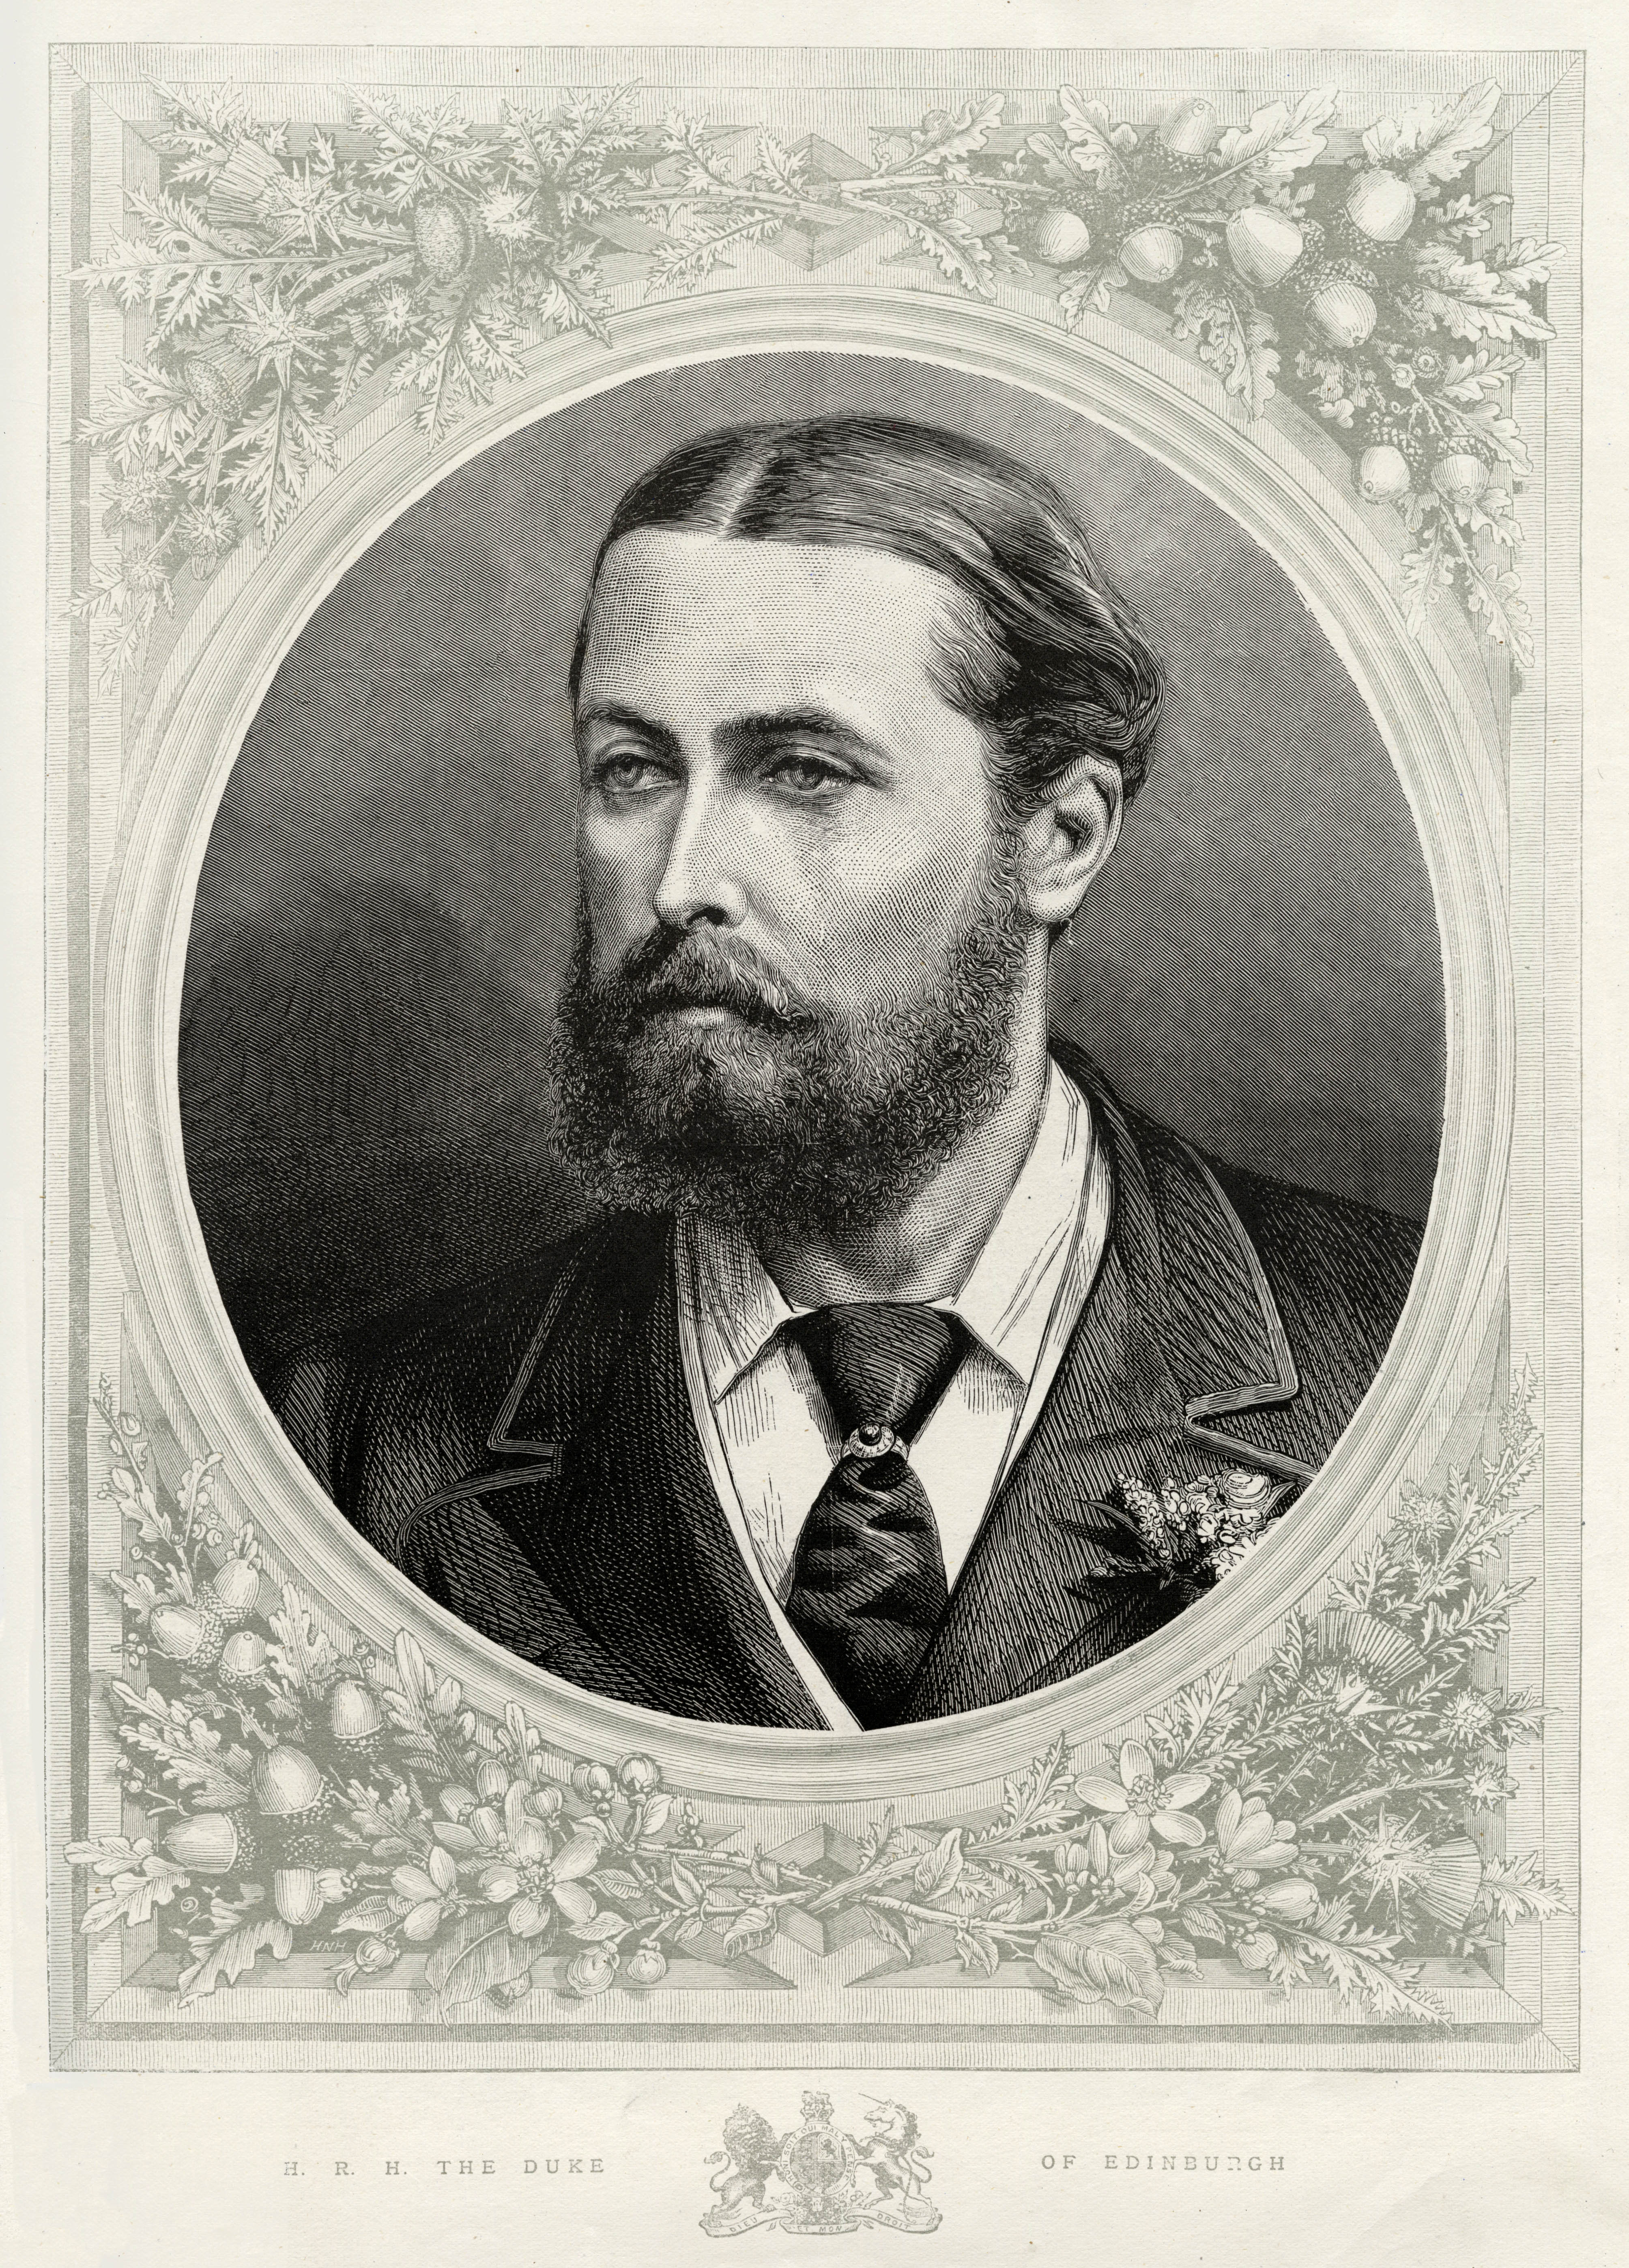 Prince Alfred, Duke of Edinburgh shown at the age of 30